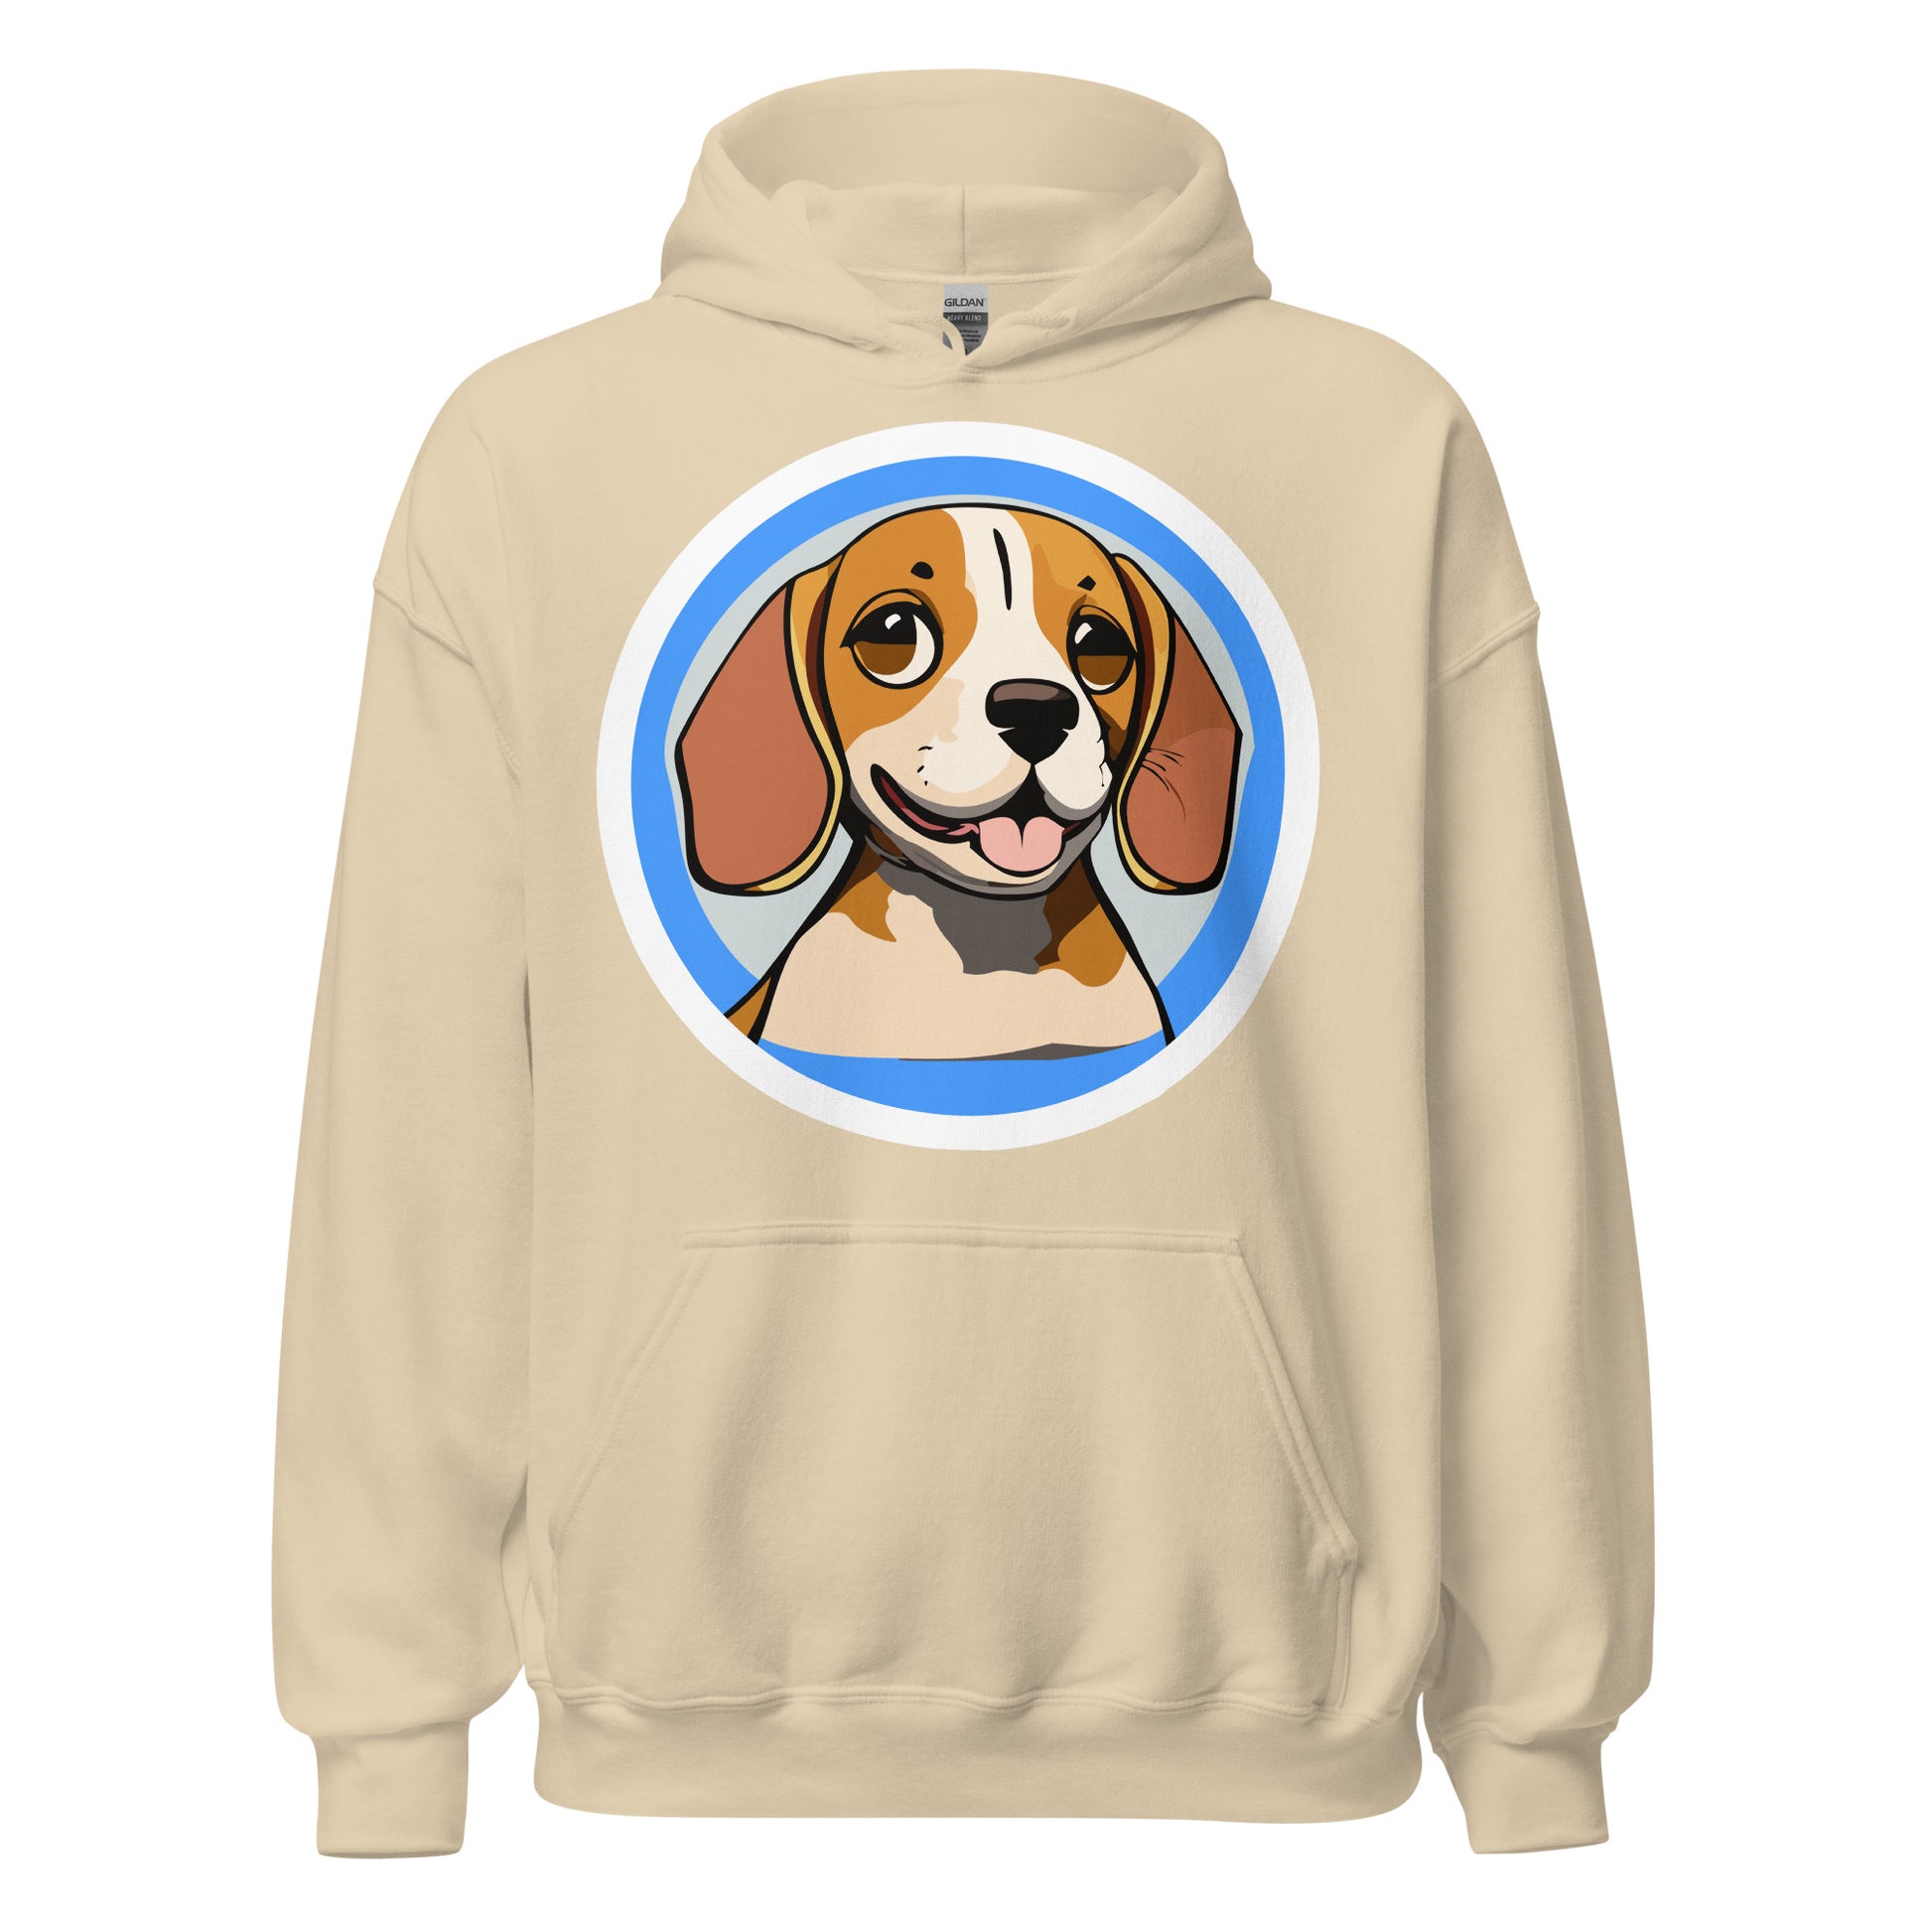 Comfy unisex hoodie for him or her with a cute beagle image, in sand color